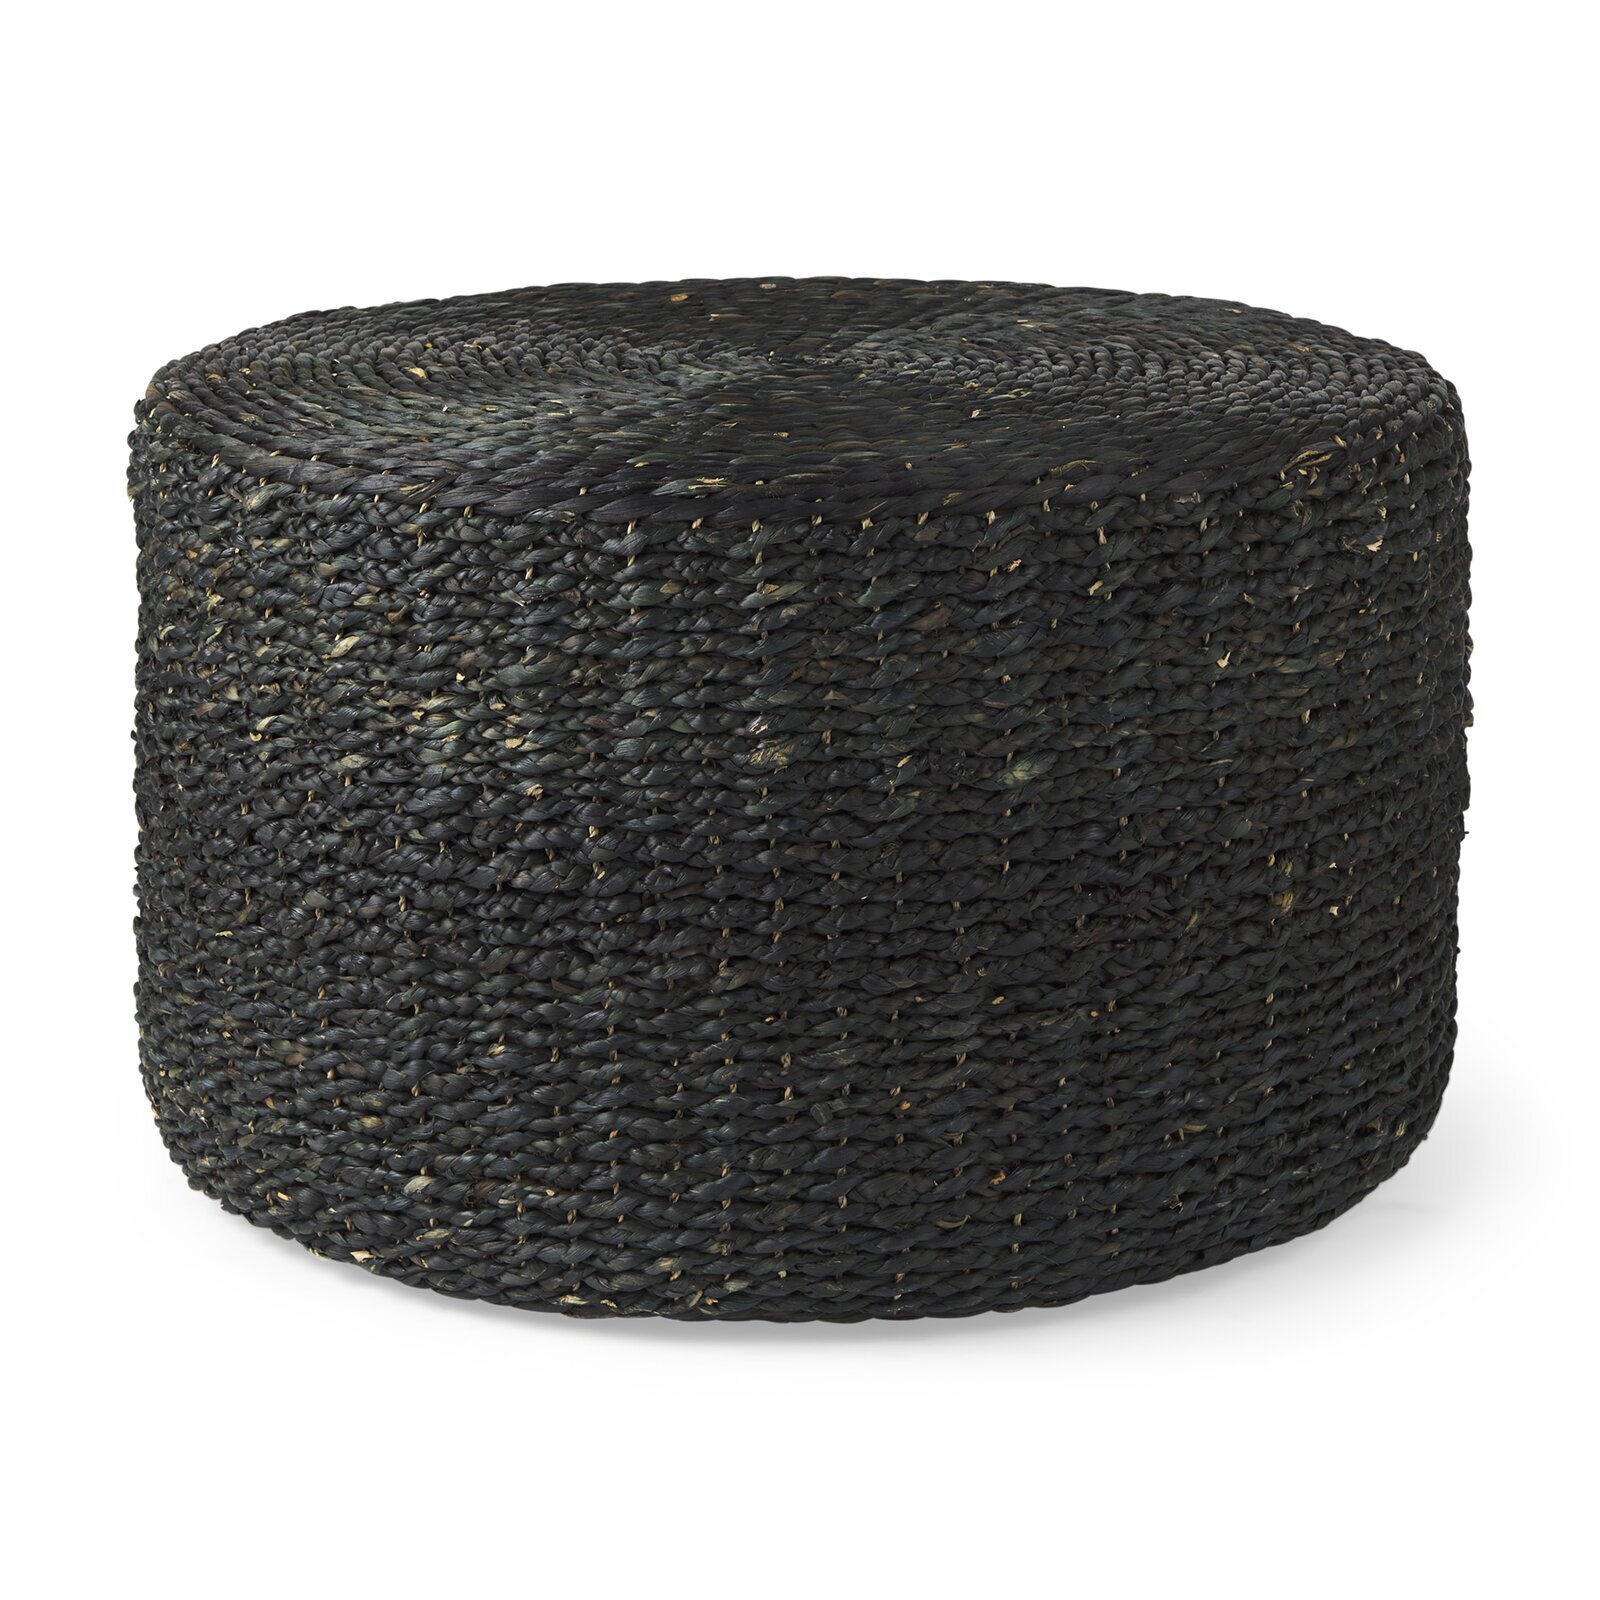 Black Wicker Round Coffee Table